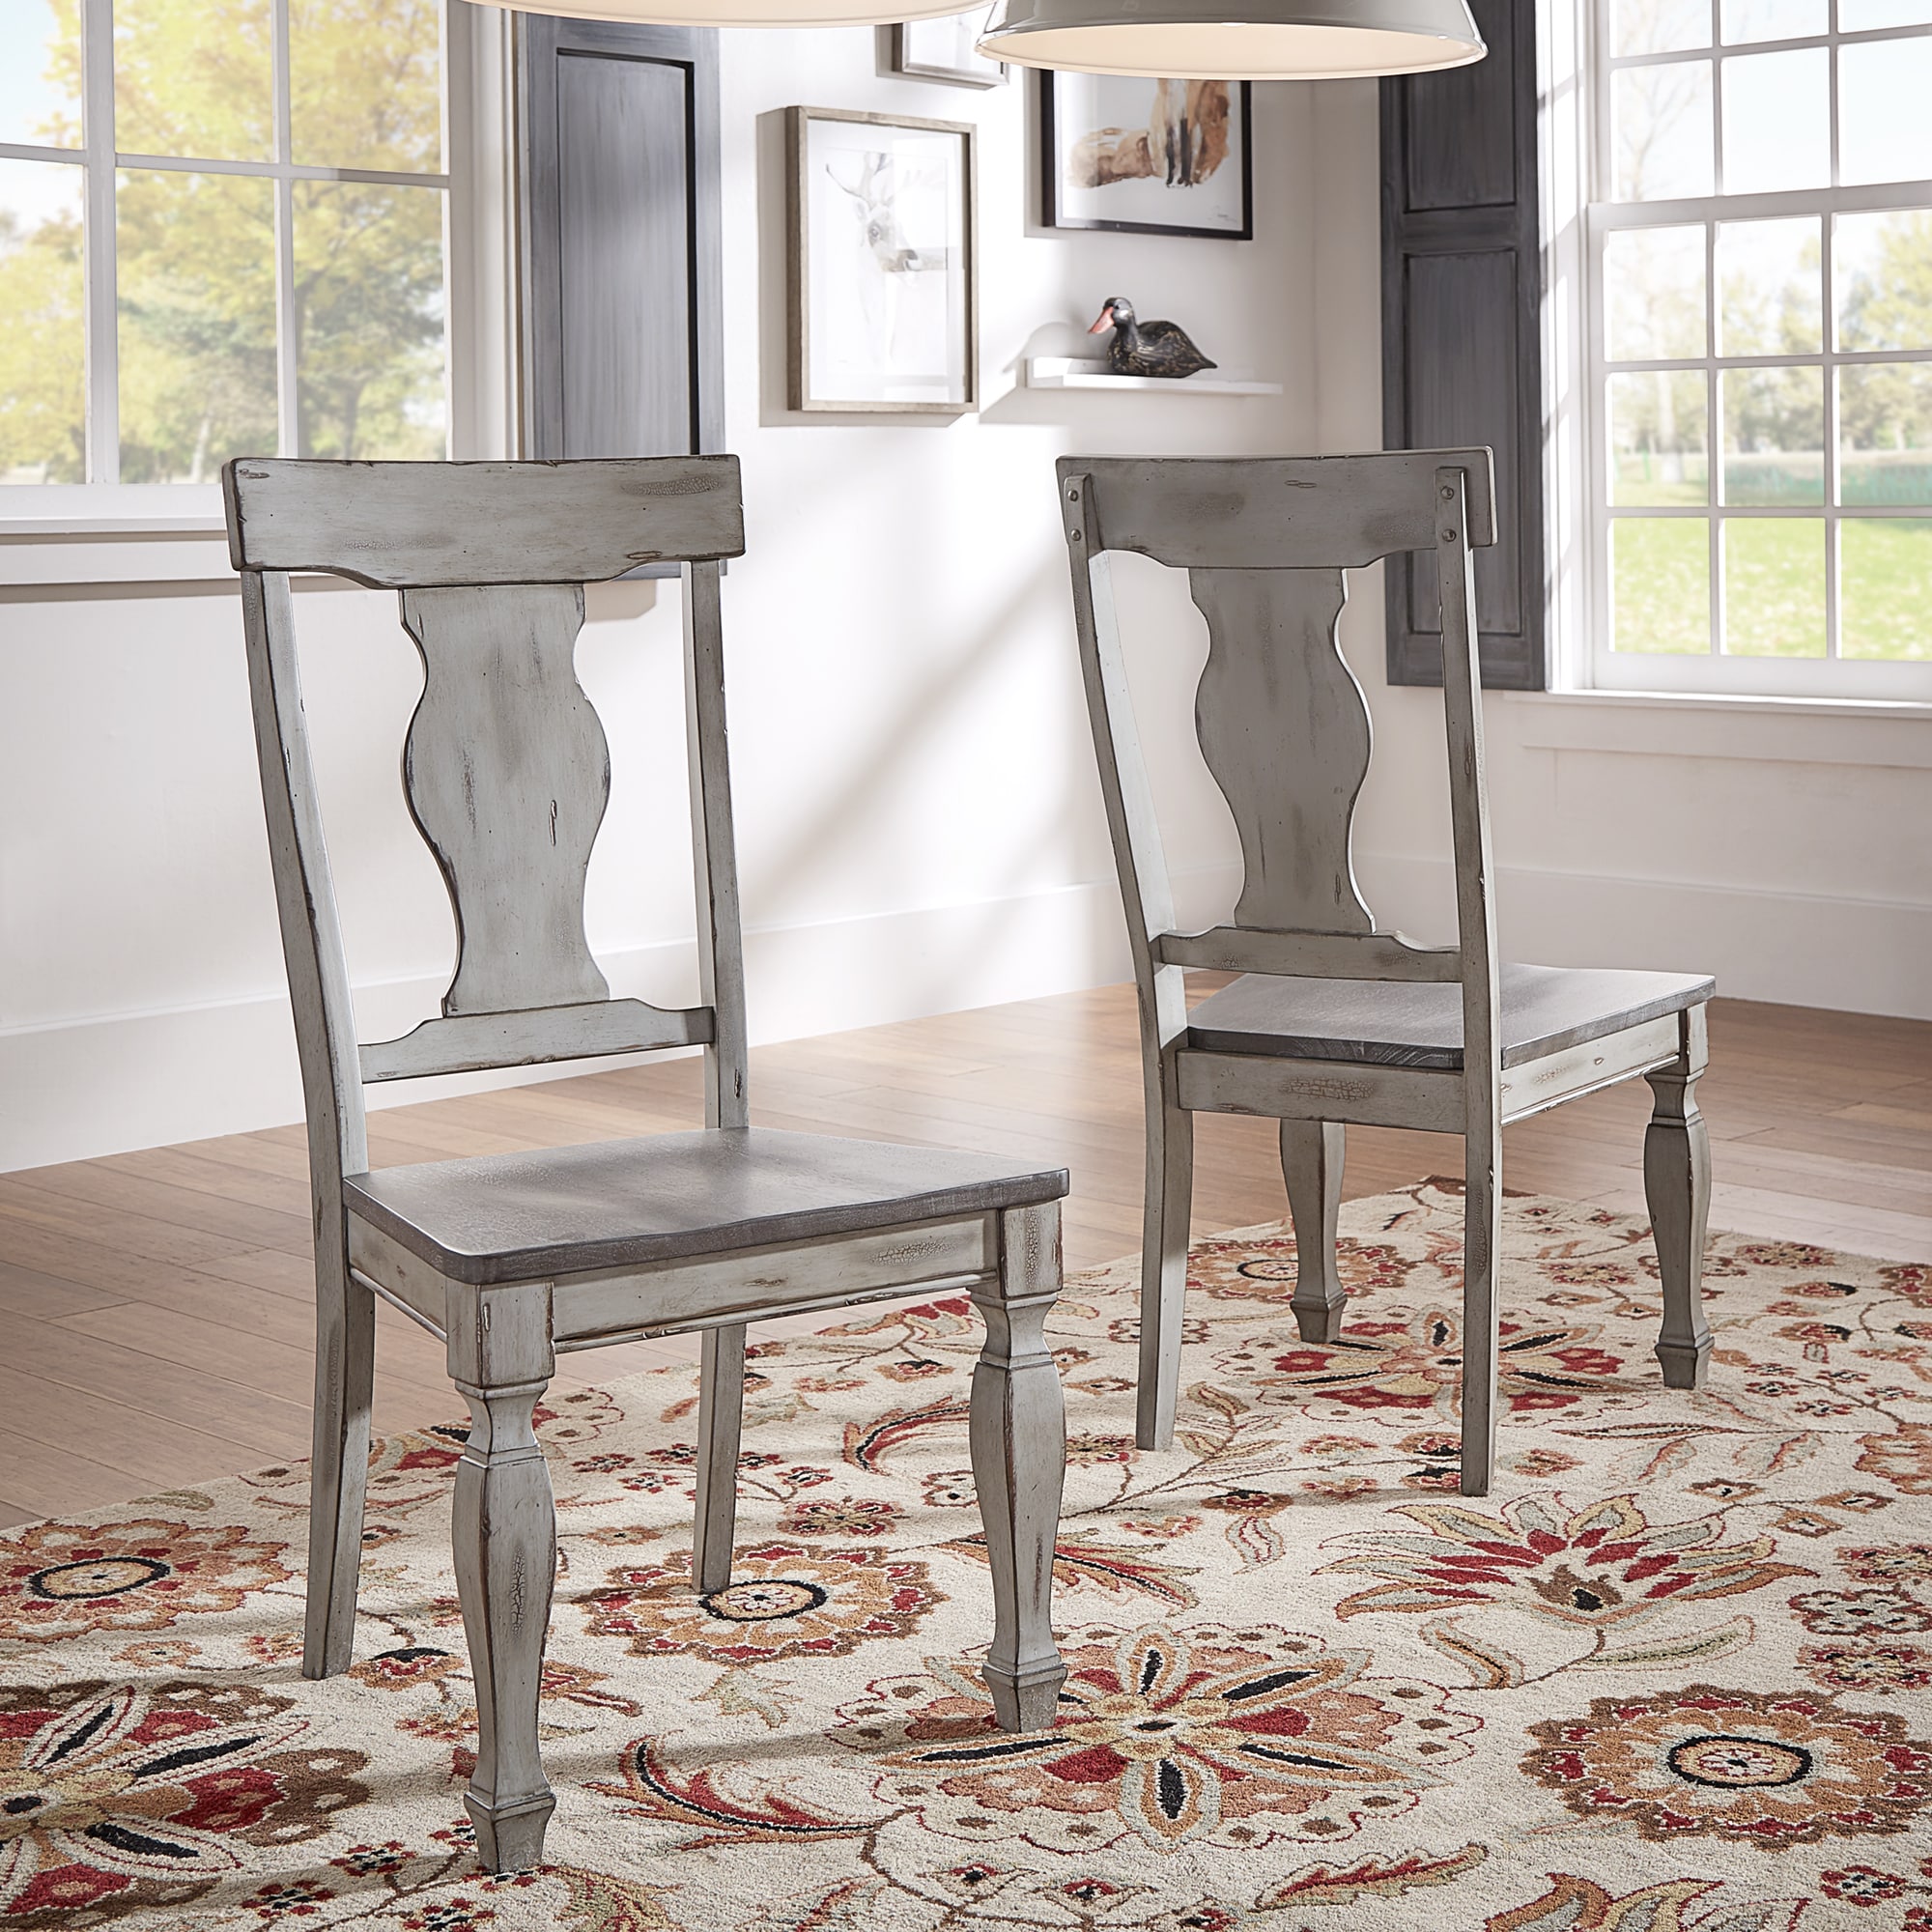 Eleanor Grey Two-Tone Square Turned Leg Wood Dining Chairs (Set of 2